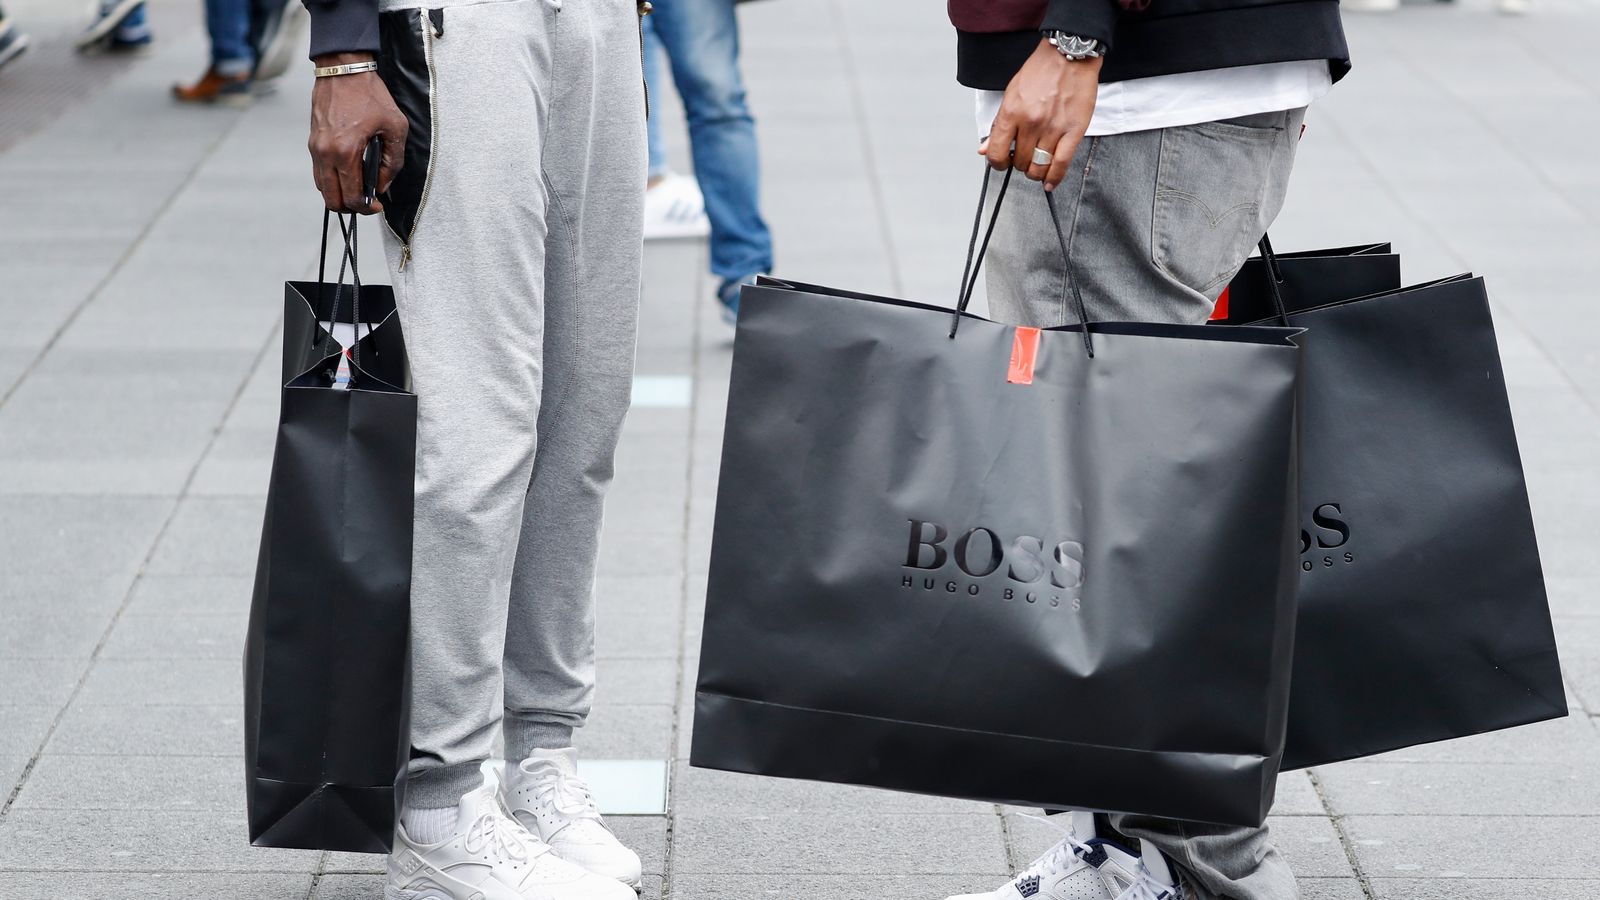 Hugo Boss to raise prices in Europe as part of profits plan | Business ...